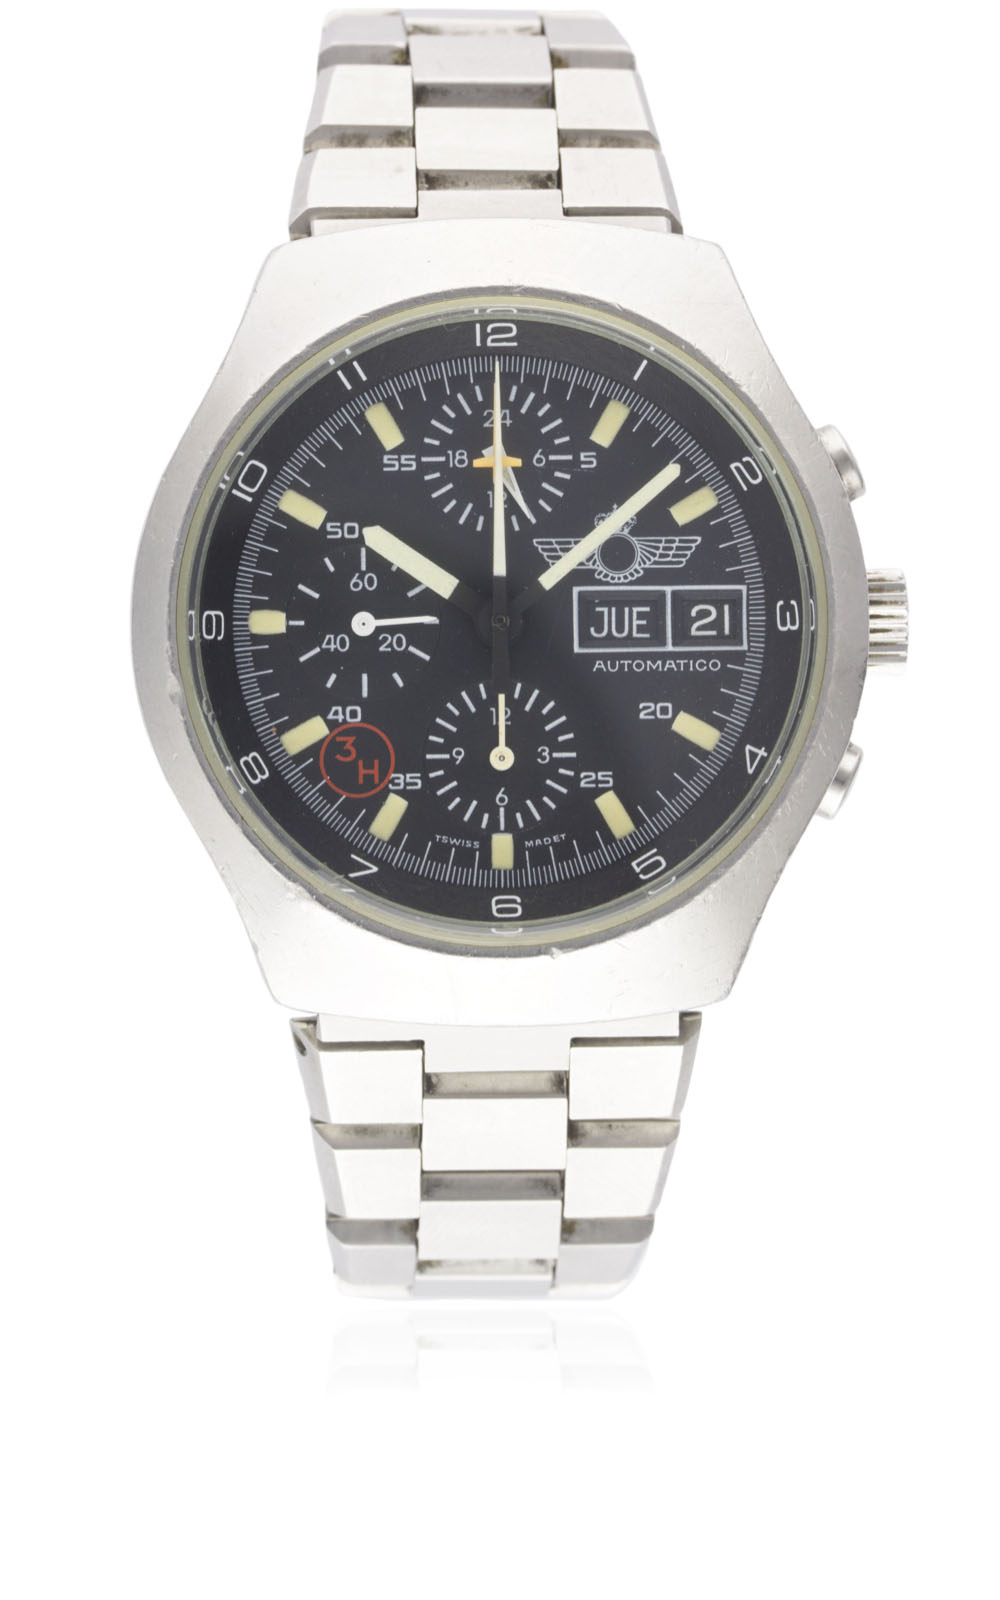 A RARE GENTLEMAN'S STAINLESS STEEL SPANISH MILITARY AIR FORCE LEMANIA AUTOMATIC CHRONOGRAPH BRACELET